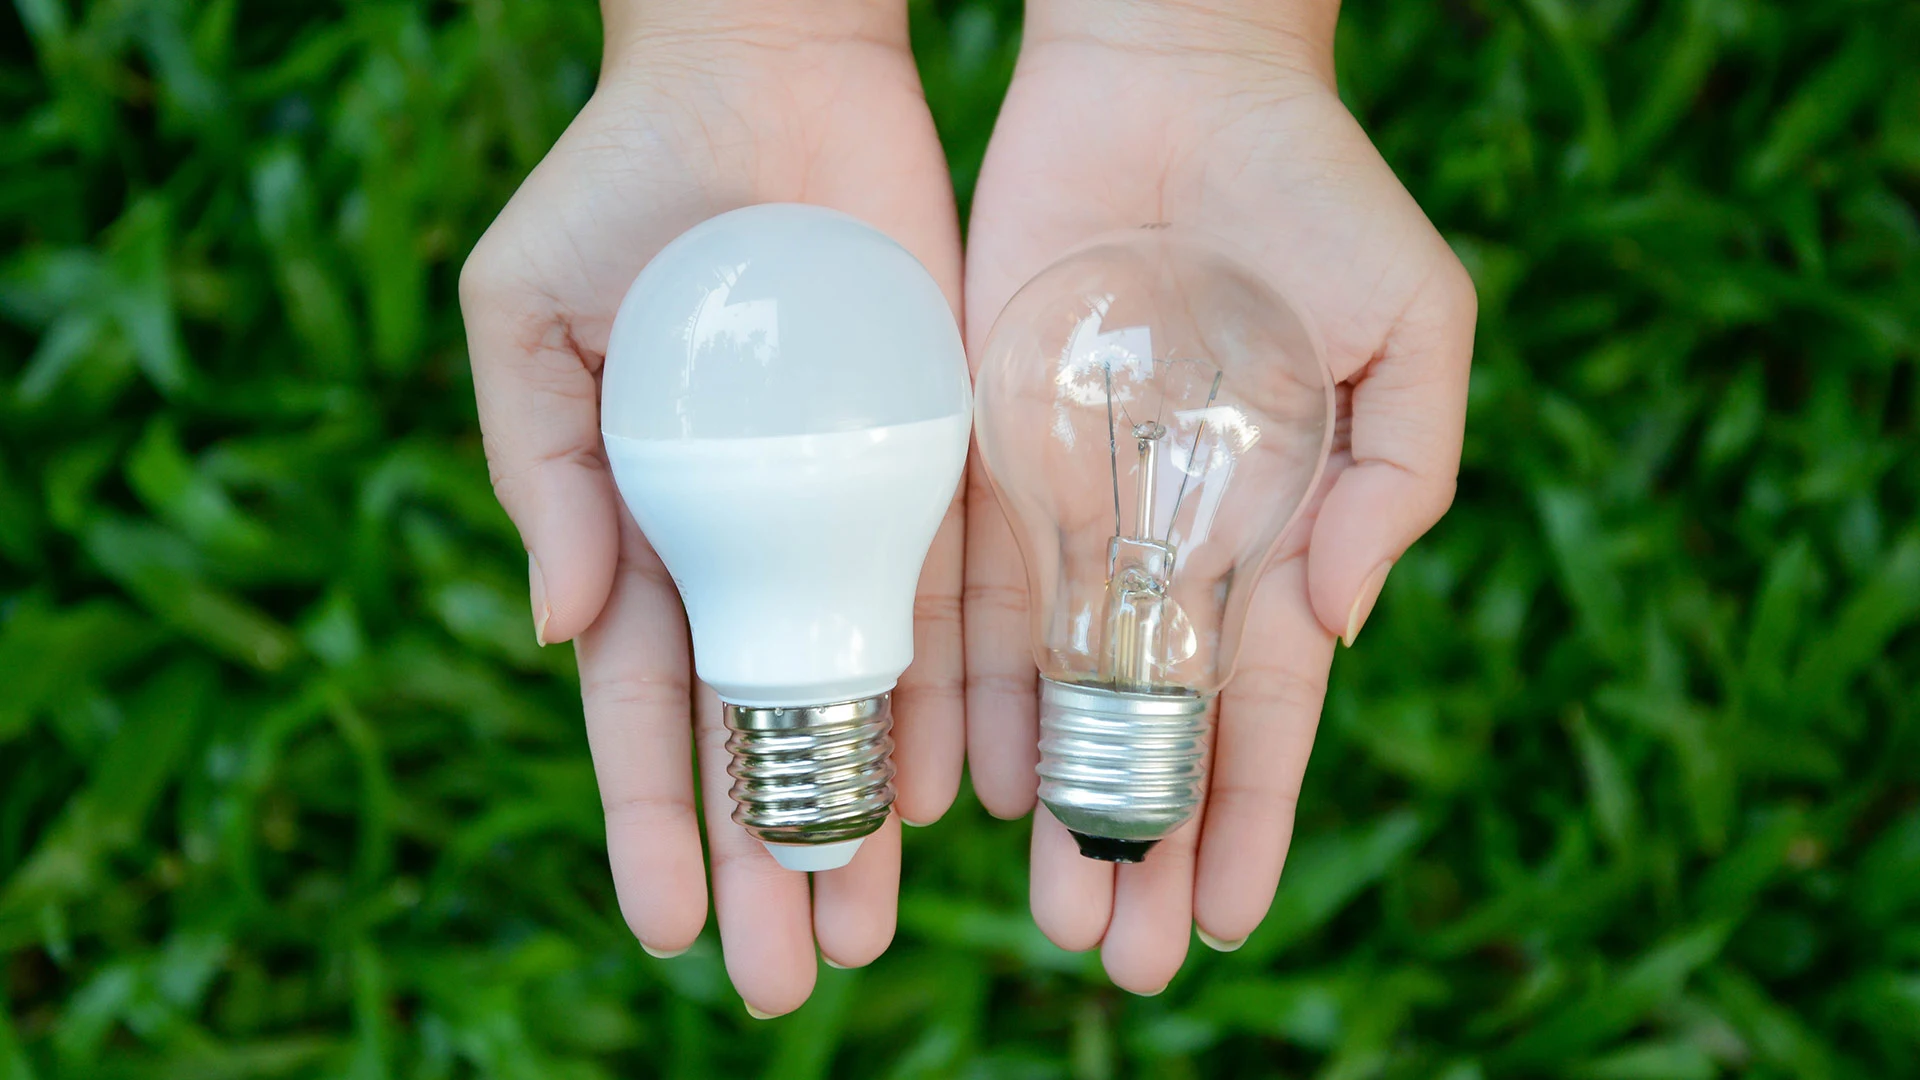 What Are the Best Types of Bulbs to Use for Outdoor Lighting?